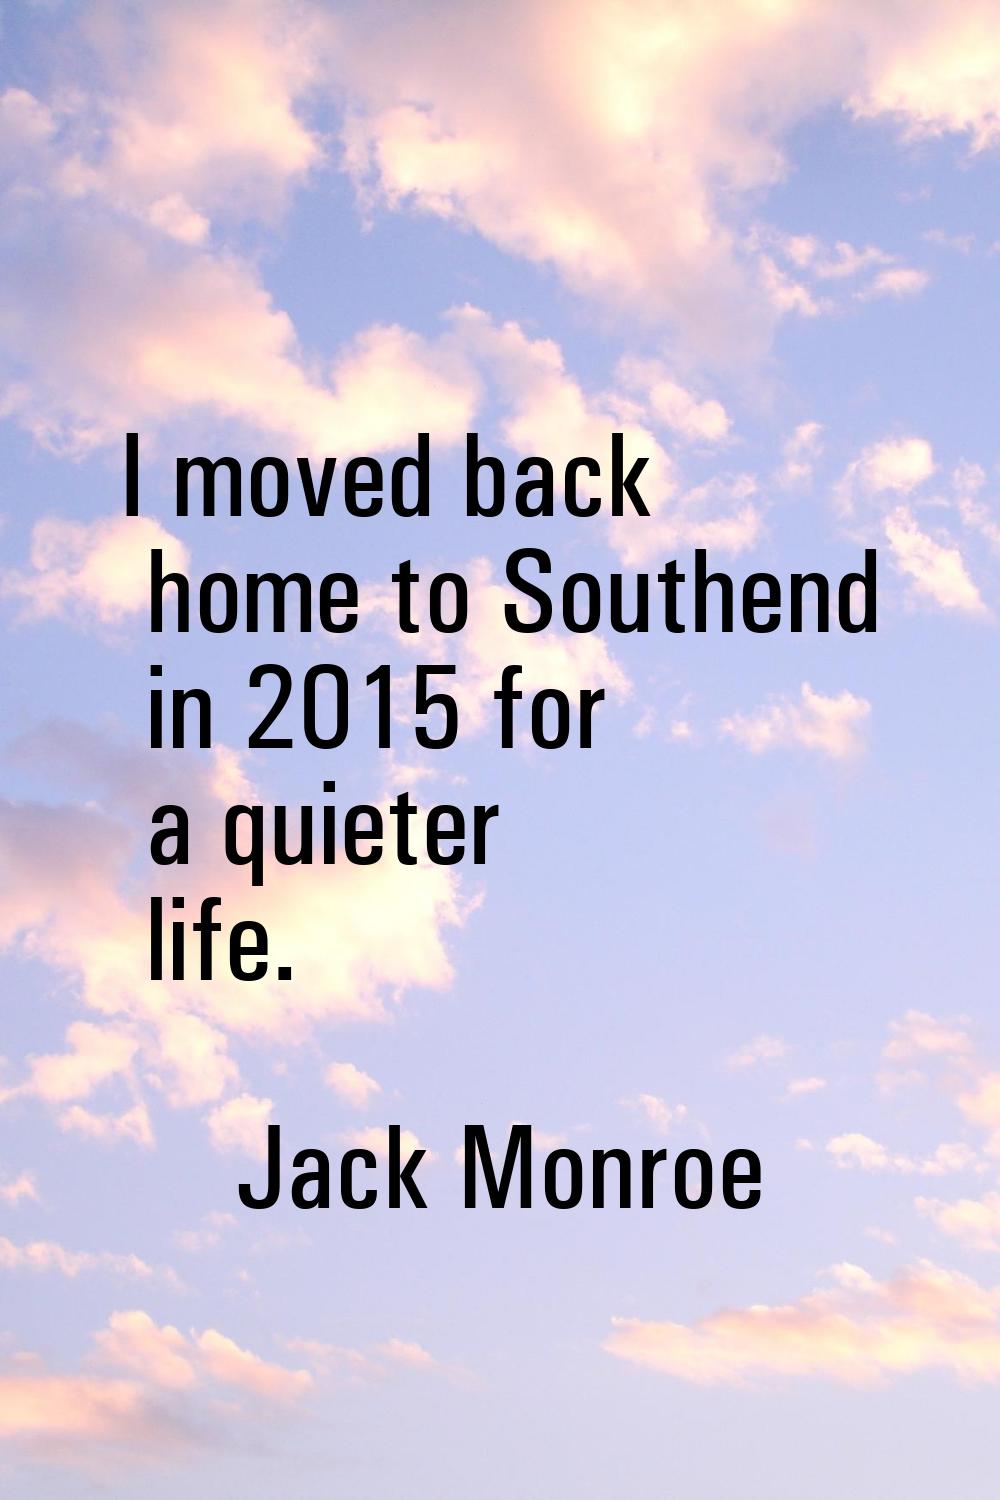 I moved back home to Southend in 2015 for a quieter life.